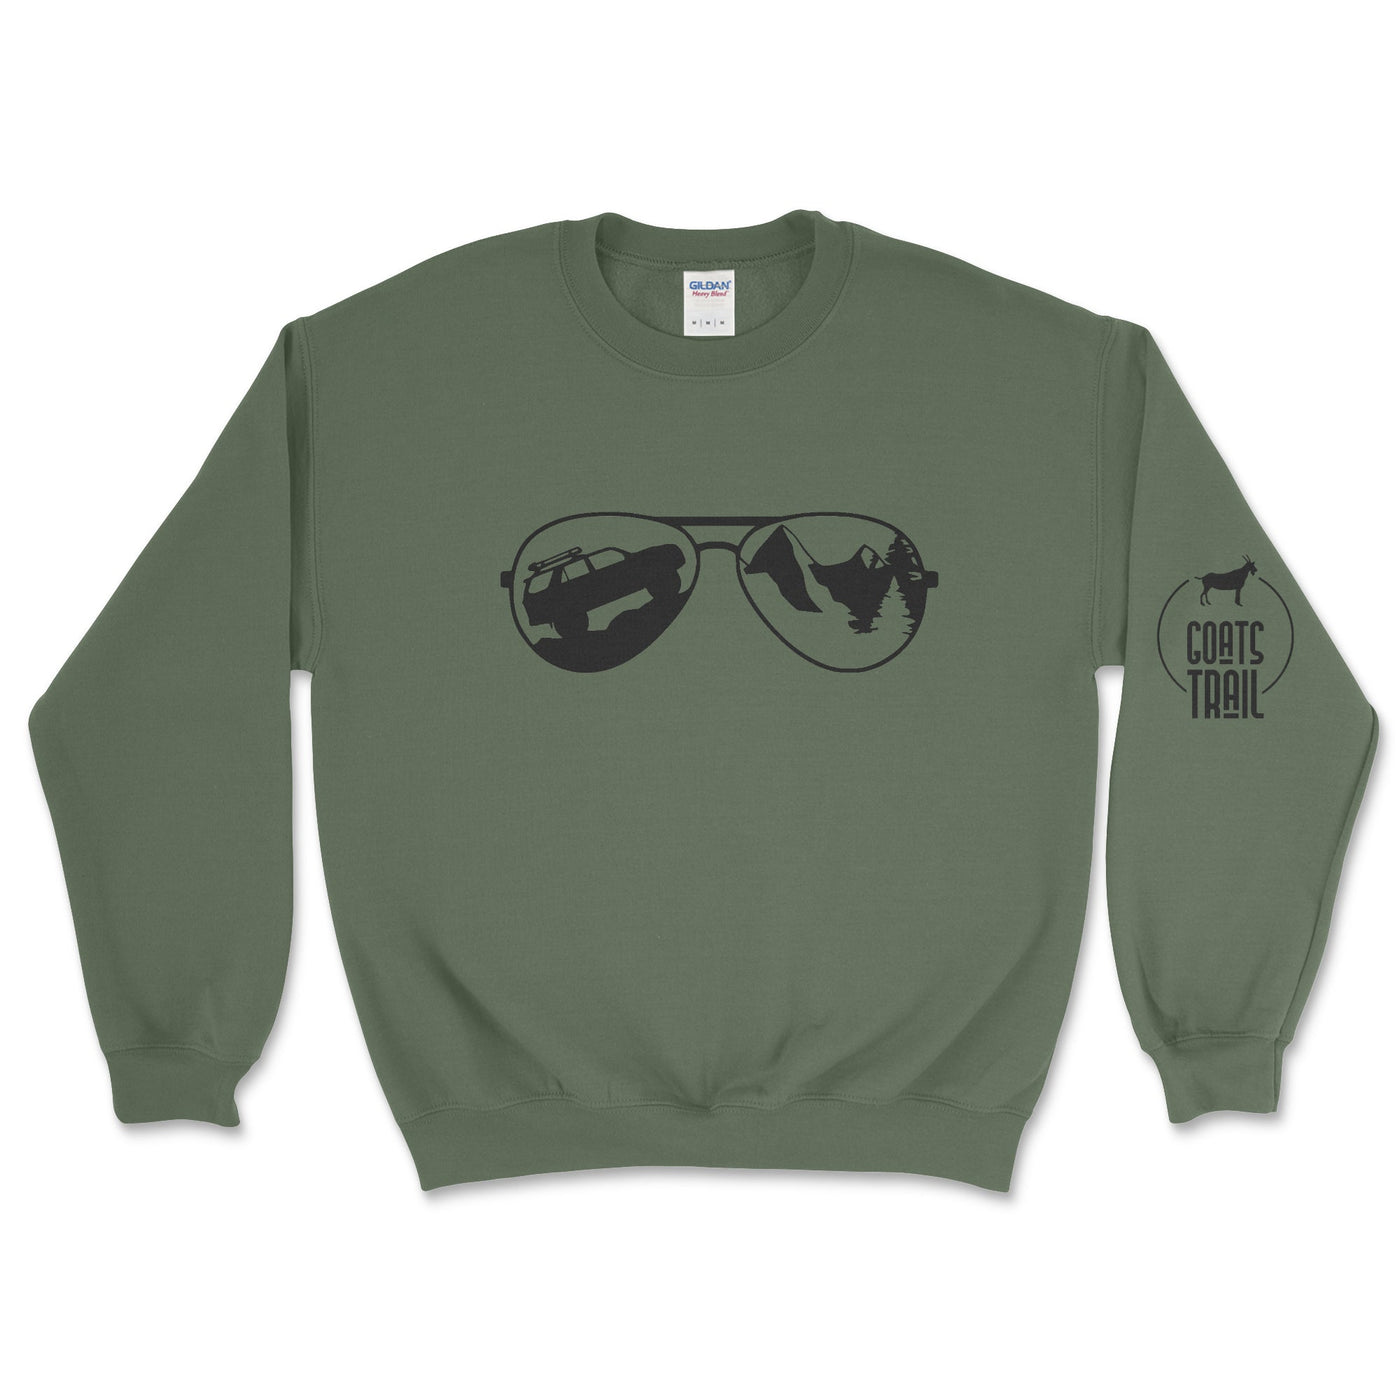 5th Generation Toyota 4Runner Aviator Offroad Crewneck - Goats Trail Off-Road Apparel Company